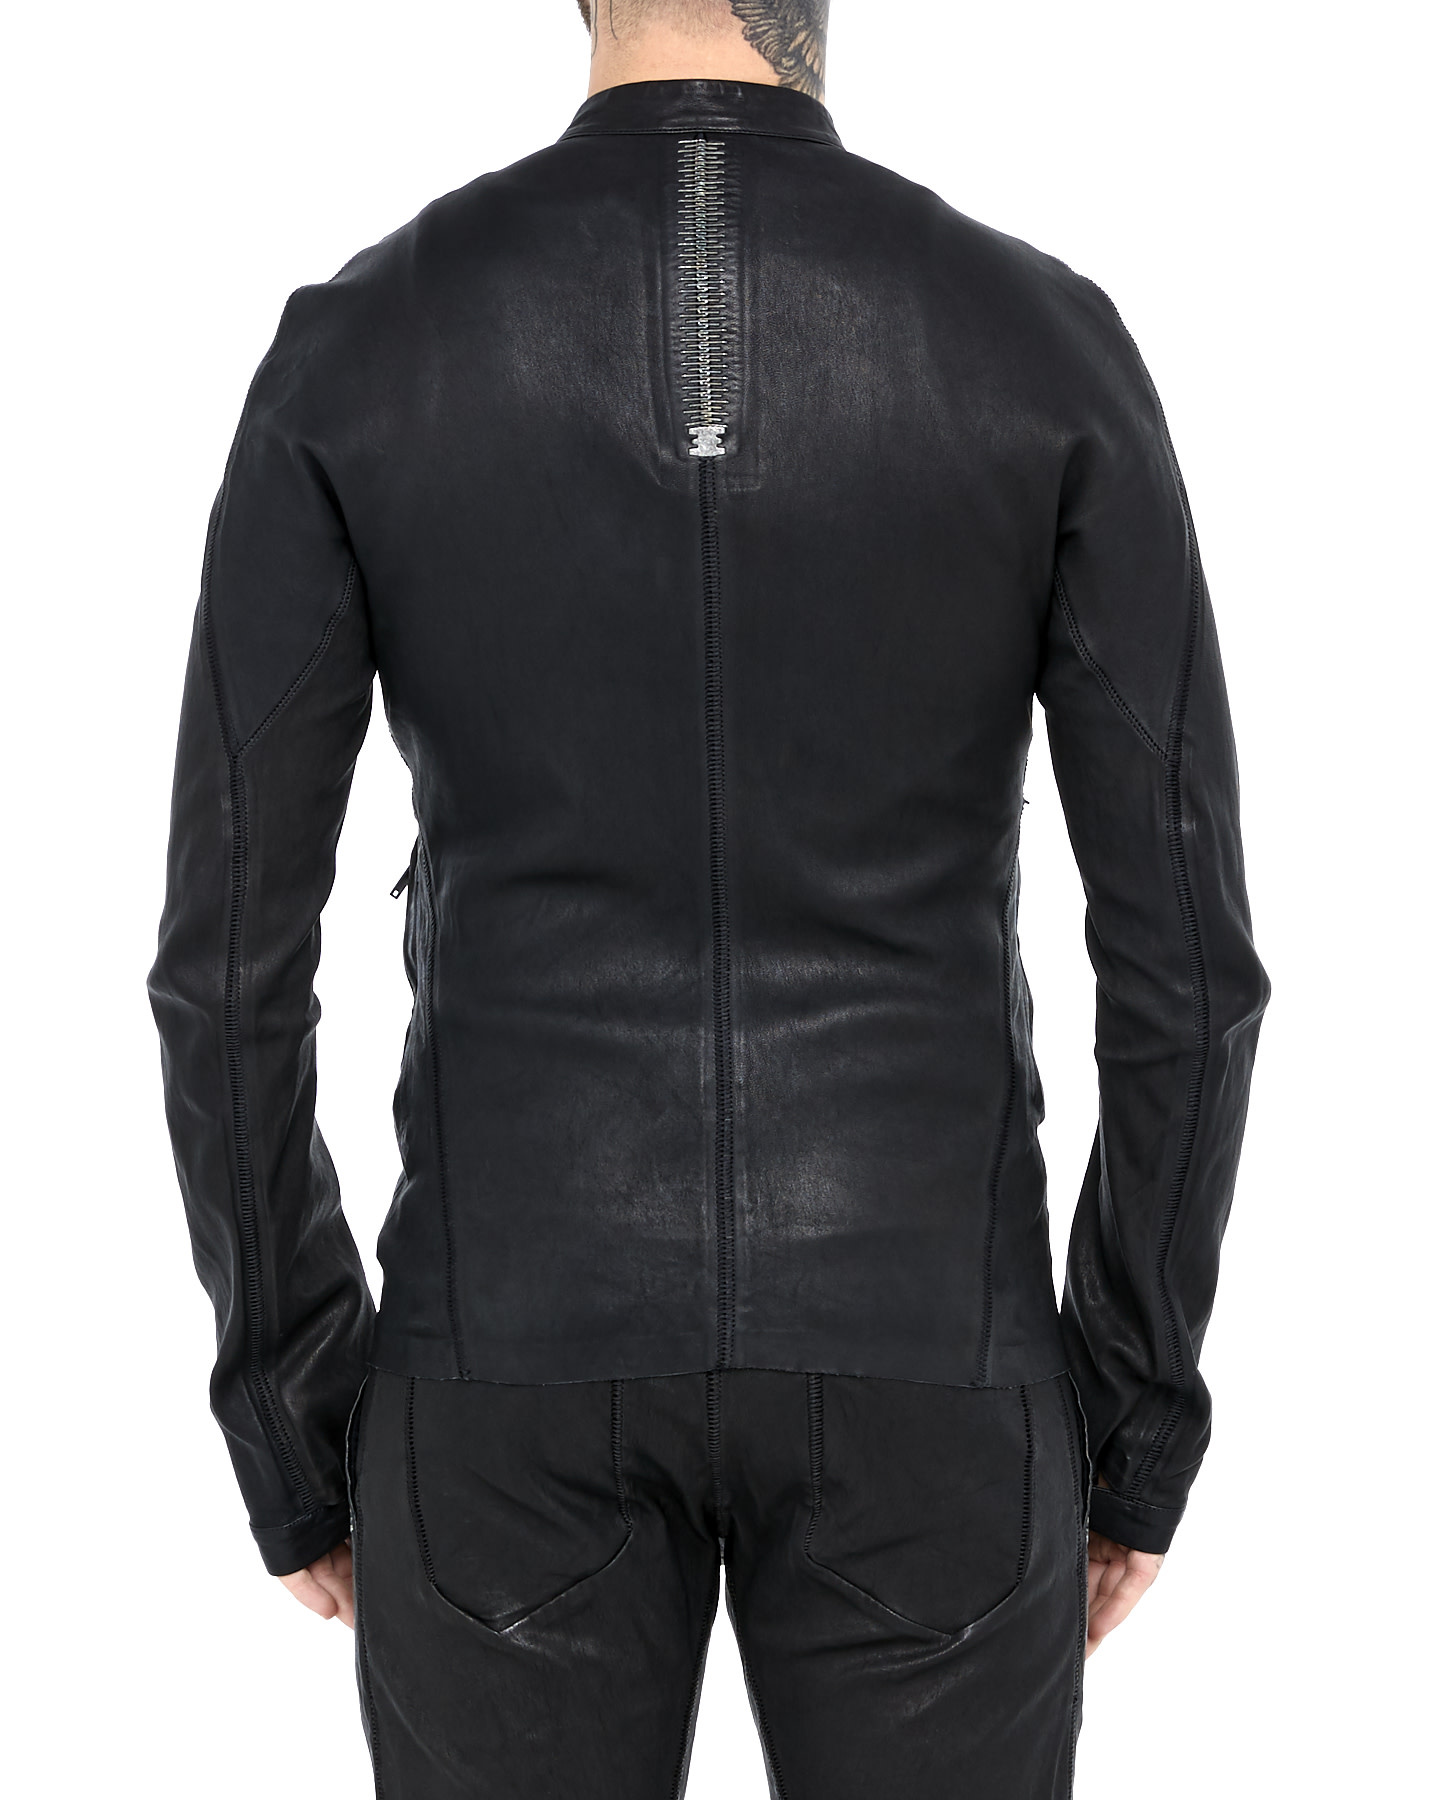 Neo Jacket NYC Leather Isaac Bute Untitled Untitled Stretch Sellam by Shop | NYC Shop -